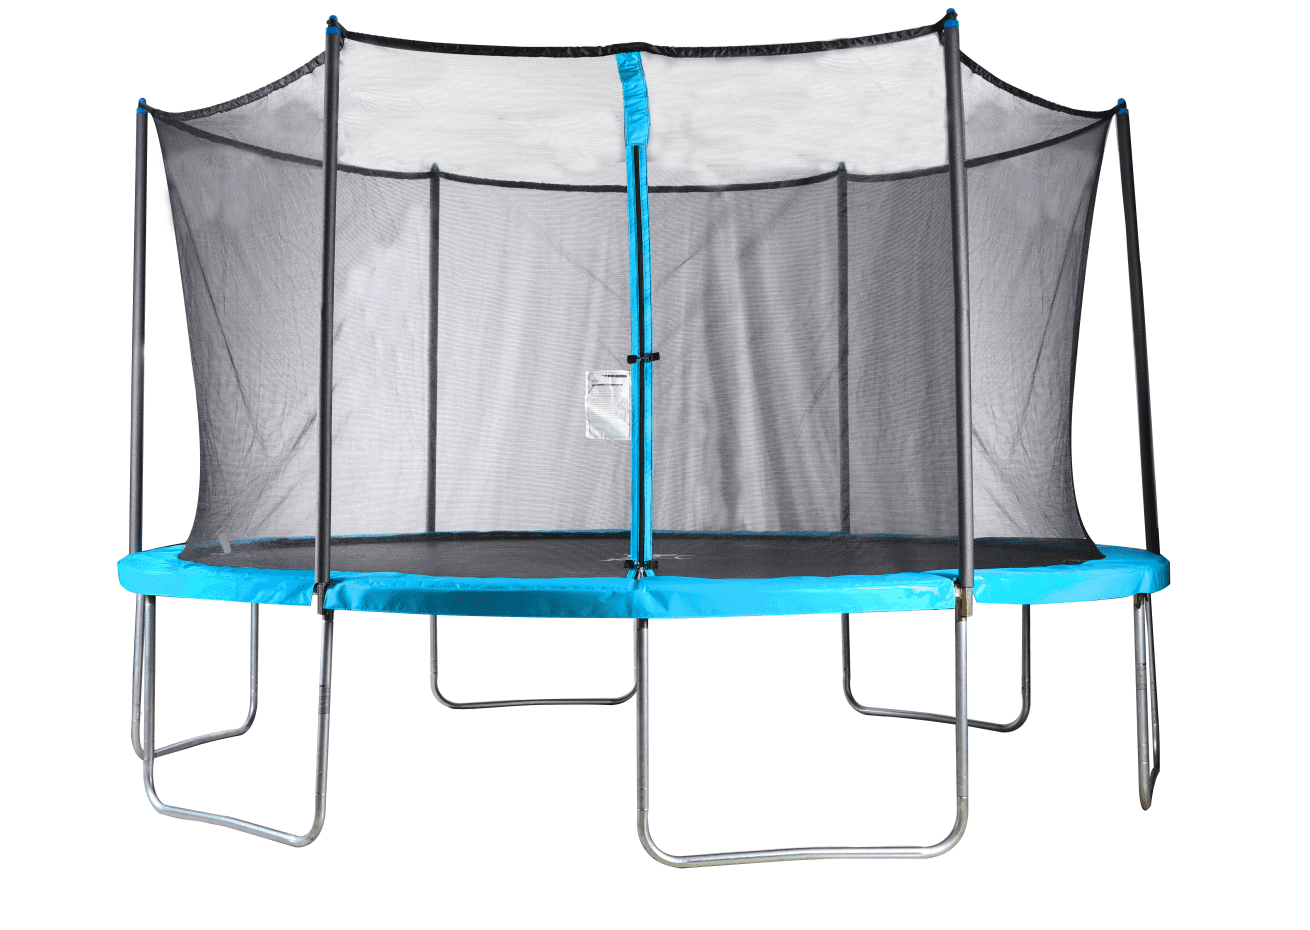 14 NEW TRAMPOLINE REPLACEMENT NET FOR JUMP ZONE